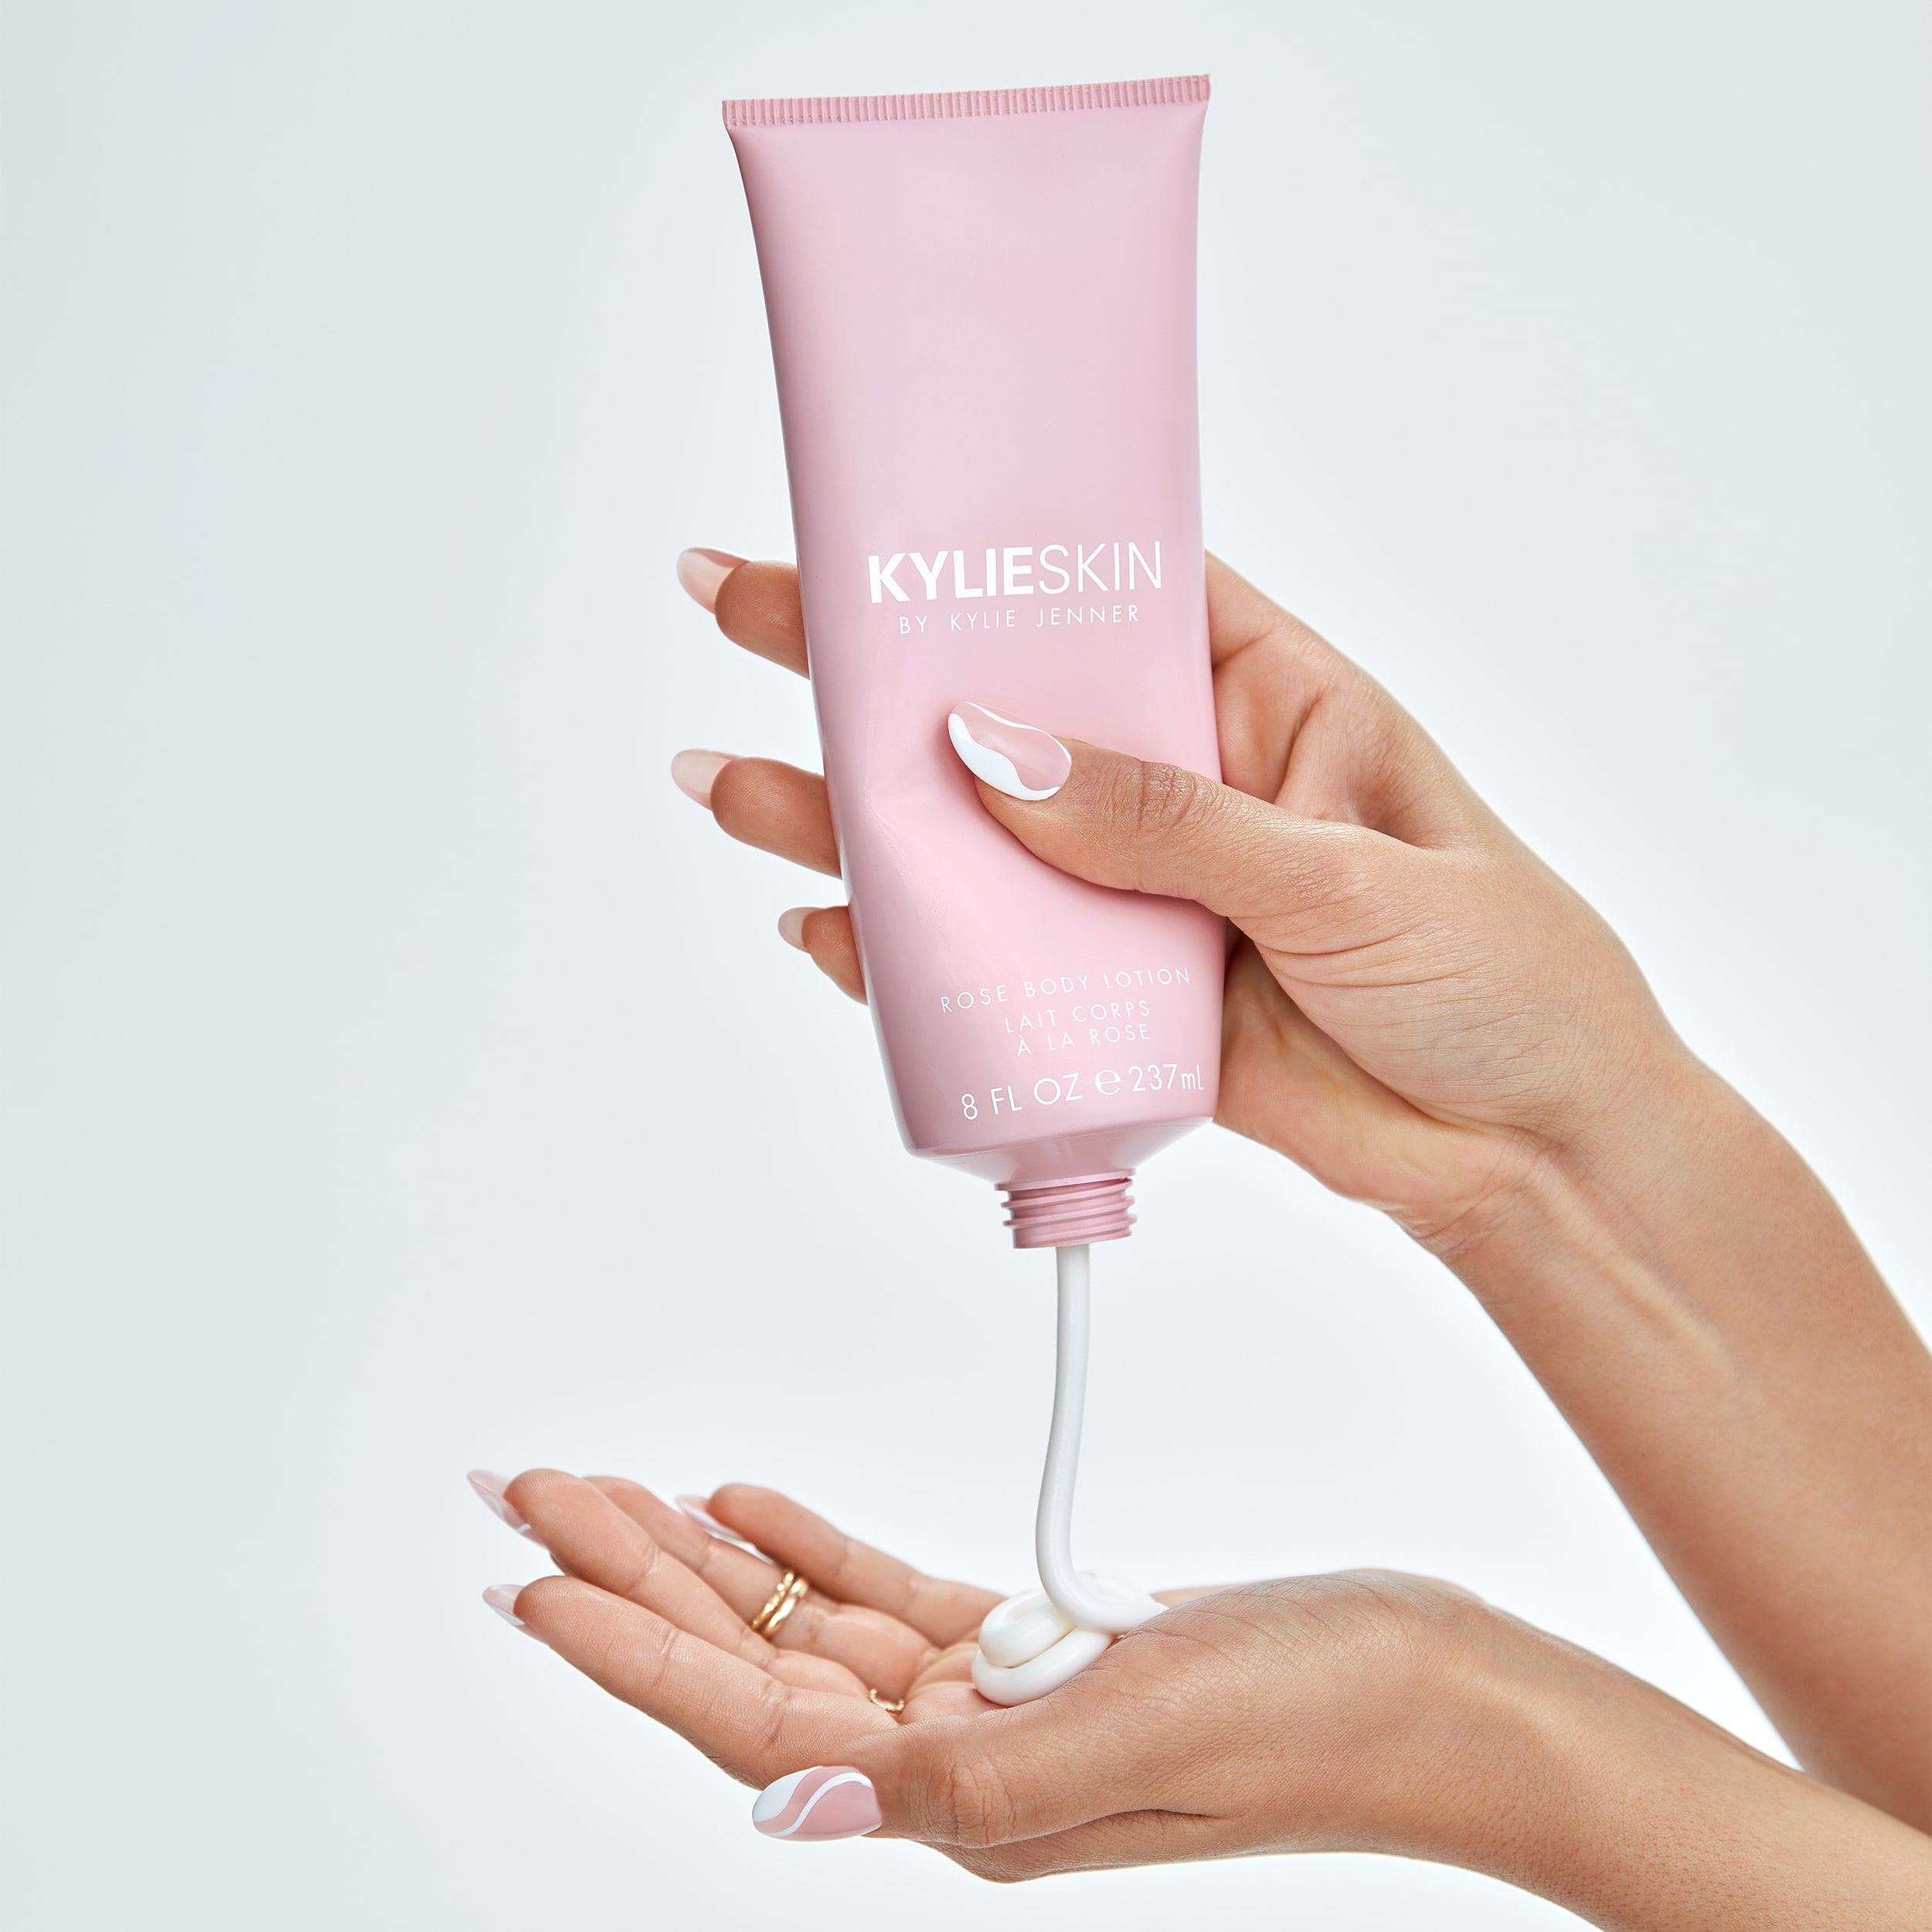 Rose Body Lotion | Kylie Skin by Kylie Jenner – Kylie